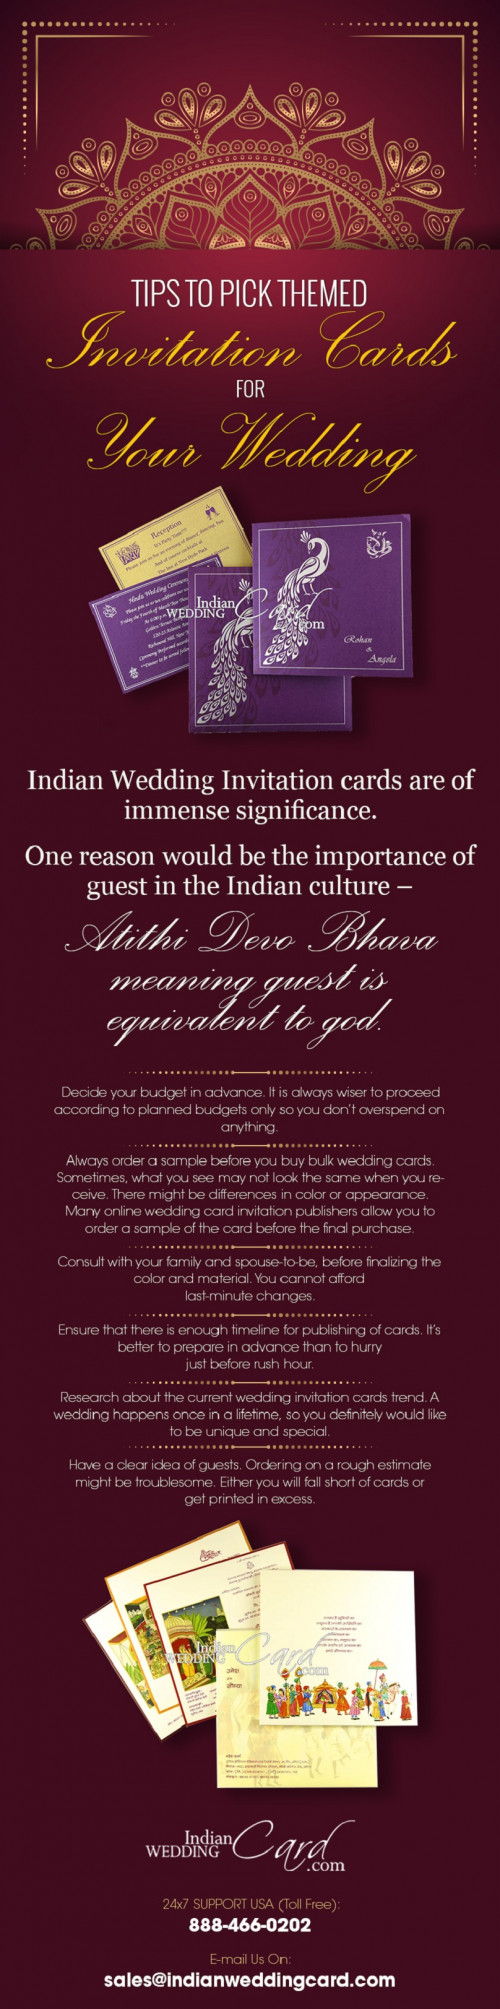 We suggest you start planning for your wedding in advance, even if it’s a year ahead. This will help you in ensuring little to no blunders in the arrangements. You can easily find your perfect wedding invitation cards online. Visit@ https://blog.indianweddingcard.com/tips-for-choosing-the-best-theme-invitation-cards-for-your-wedding/